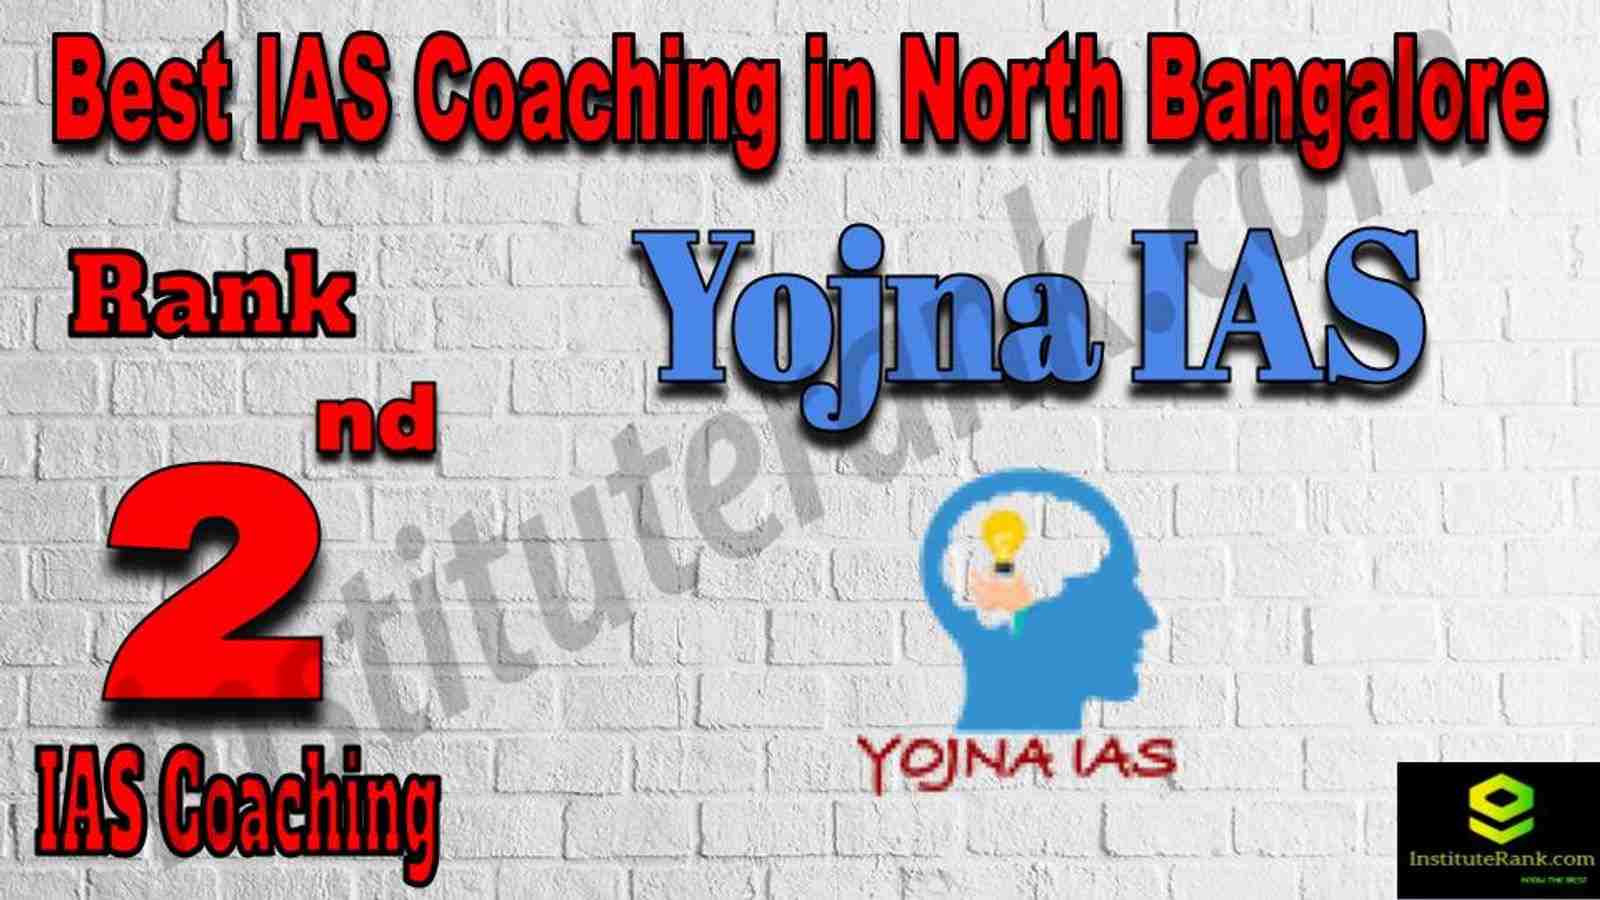 2nd Best IAS Coaching in North Bangalore